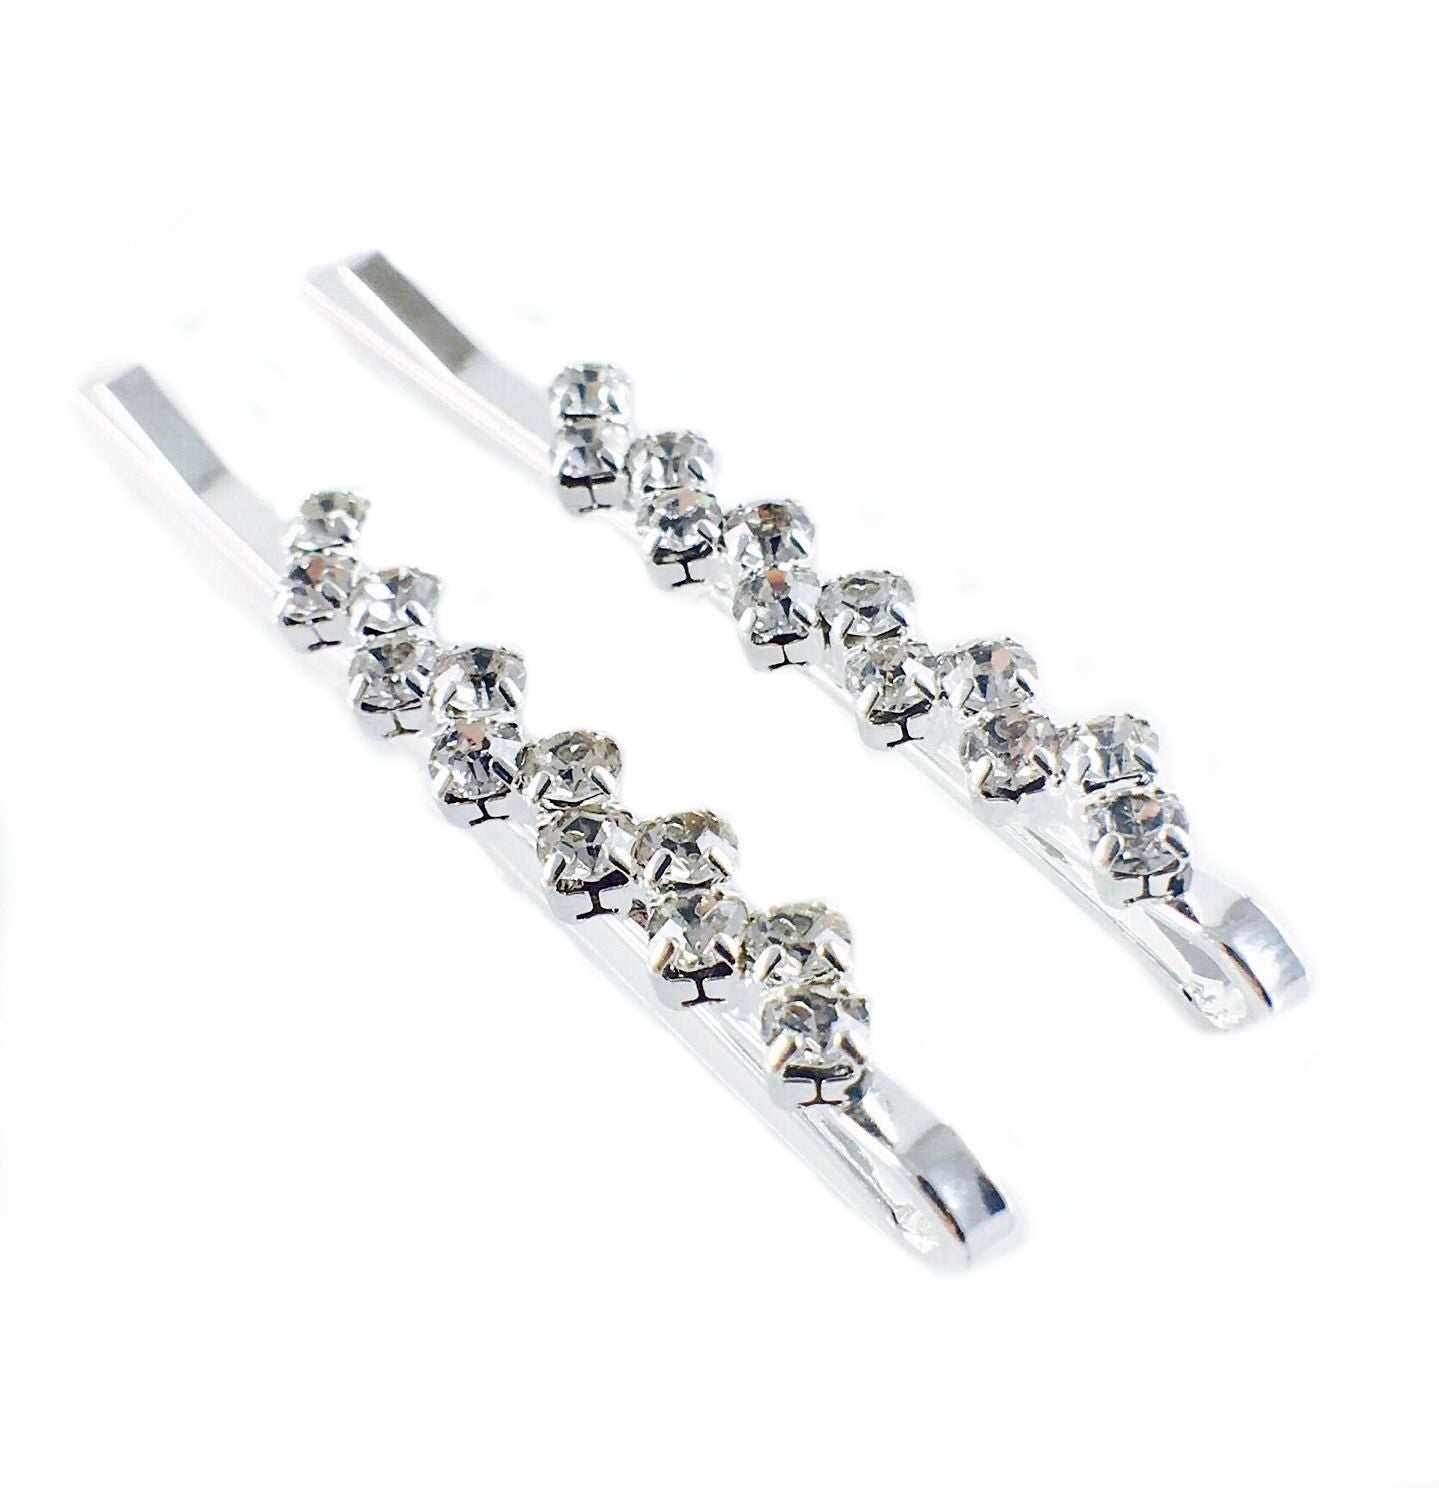 Simple Style Bobby Pin Pair Rhinestone Crystal Silver Gold (2 colors), Bobby Pin - MOGHANT